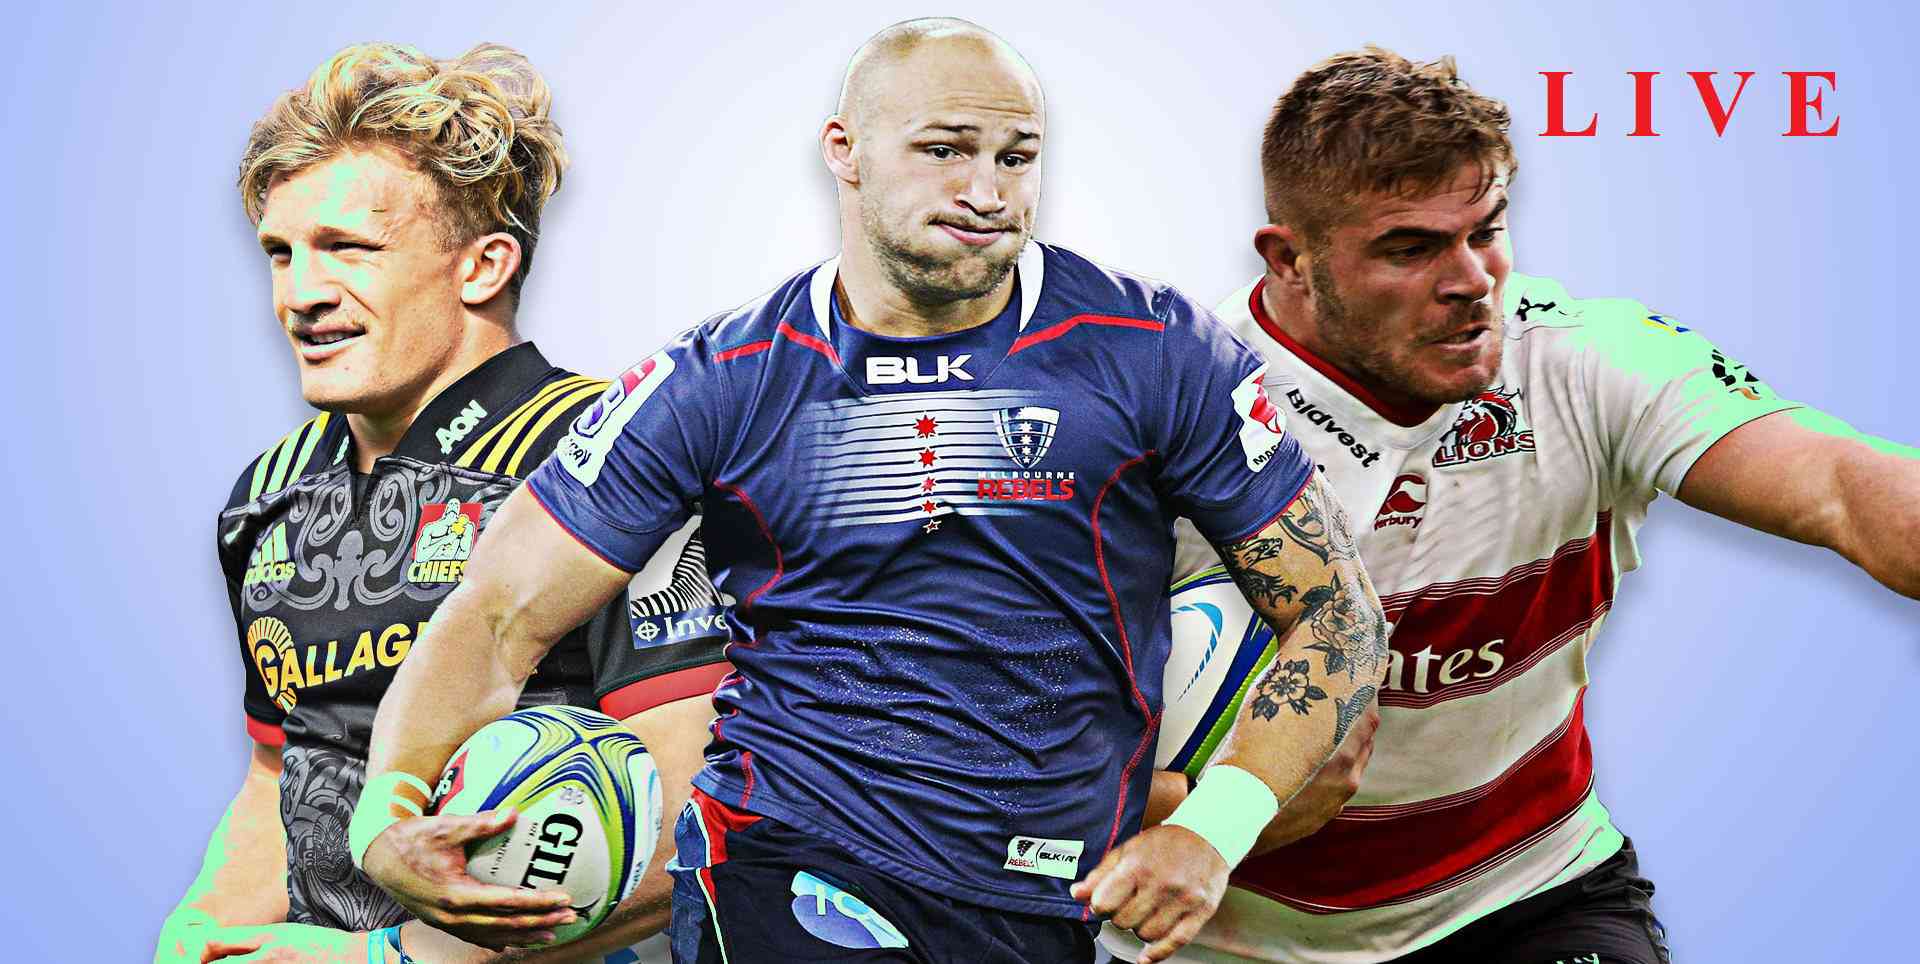 Watch Sunwloves Vs Kings super Rugby Live